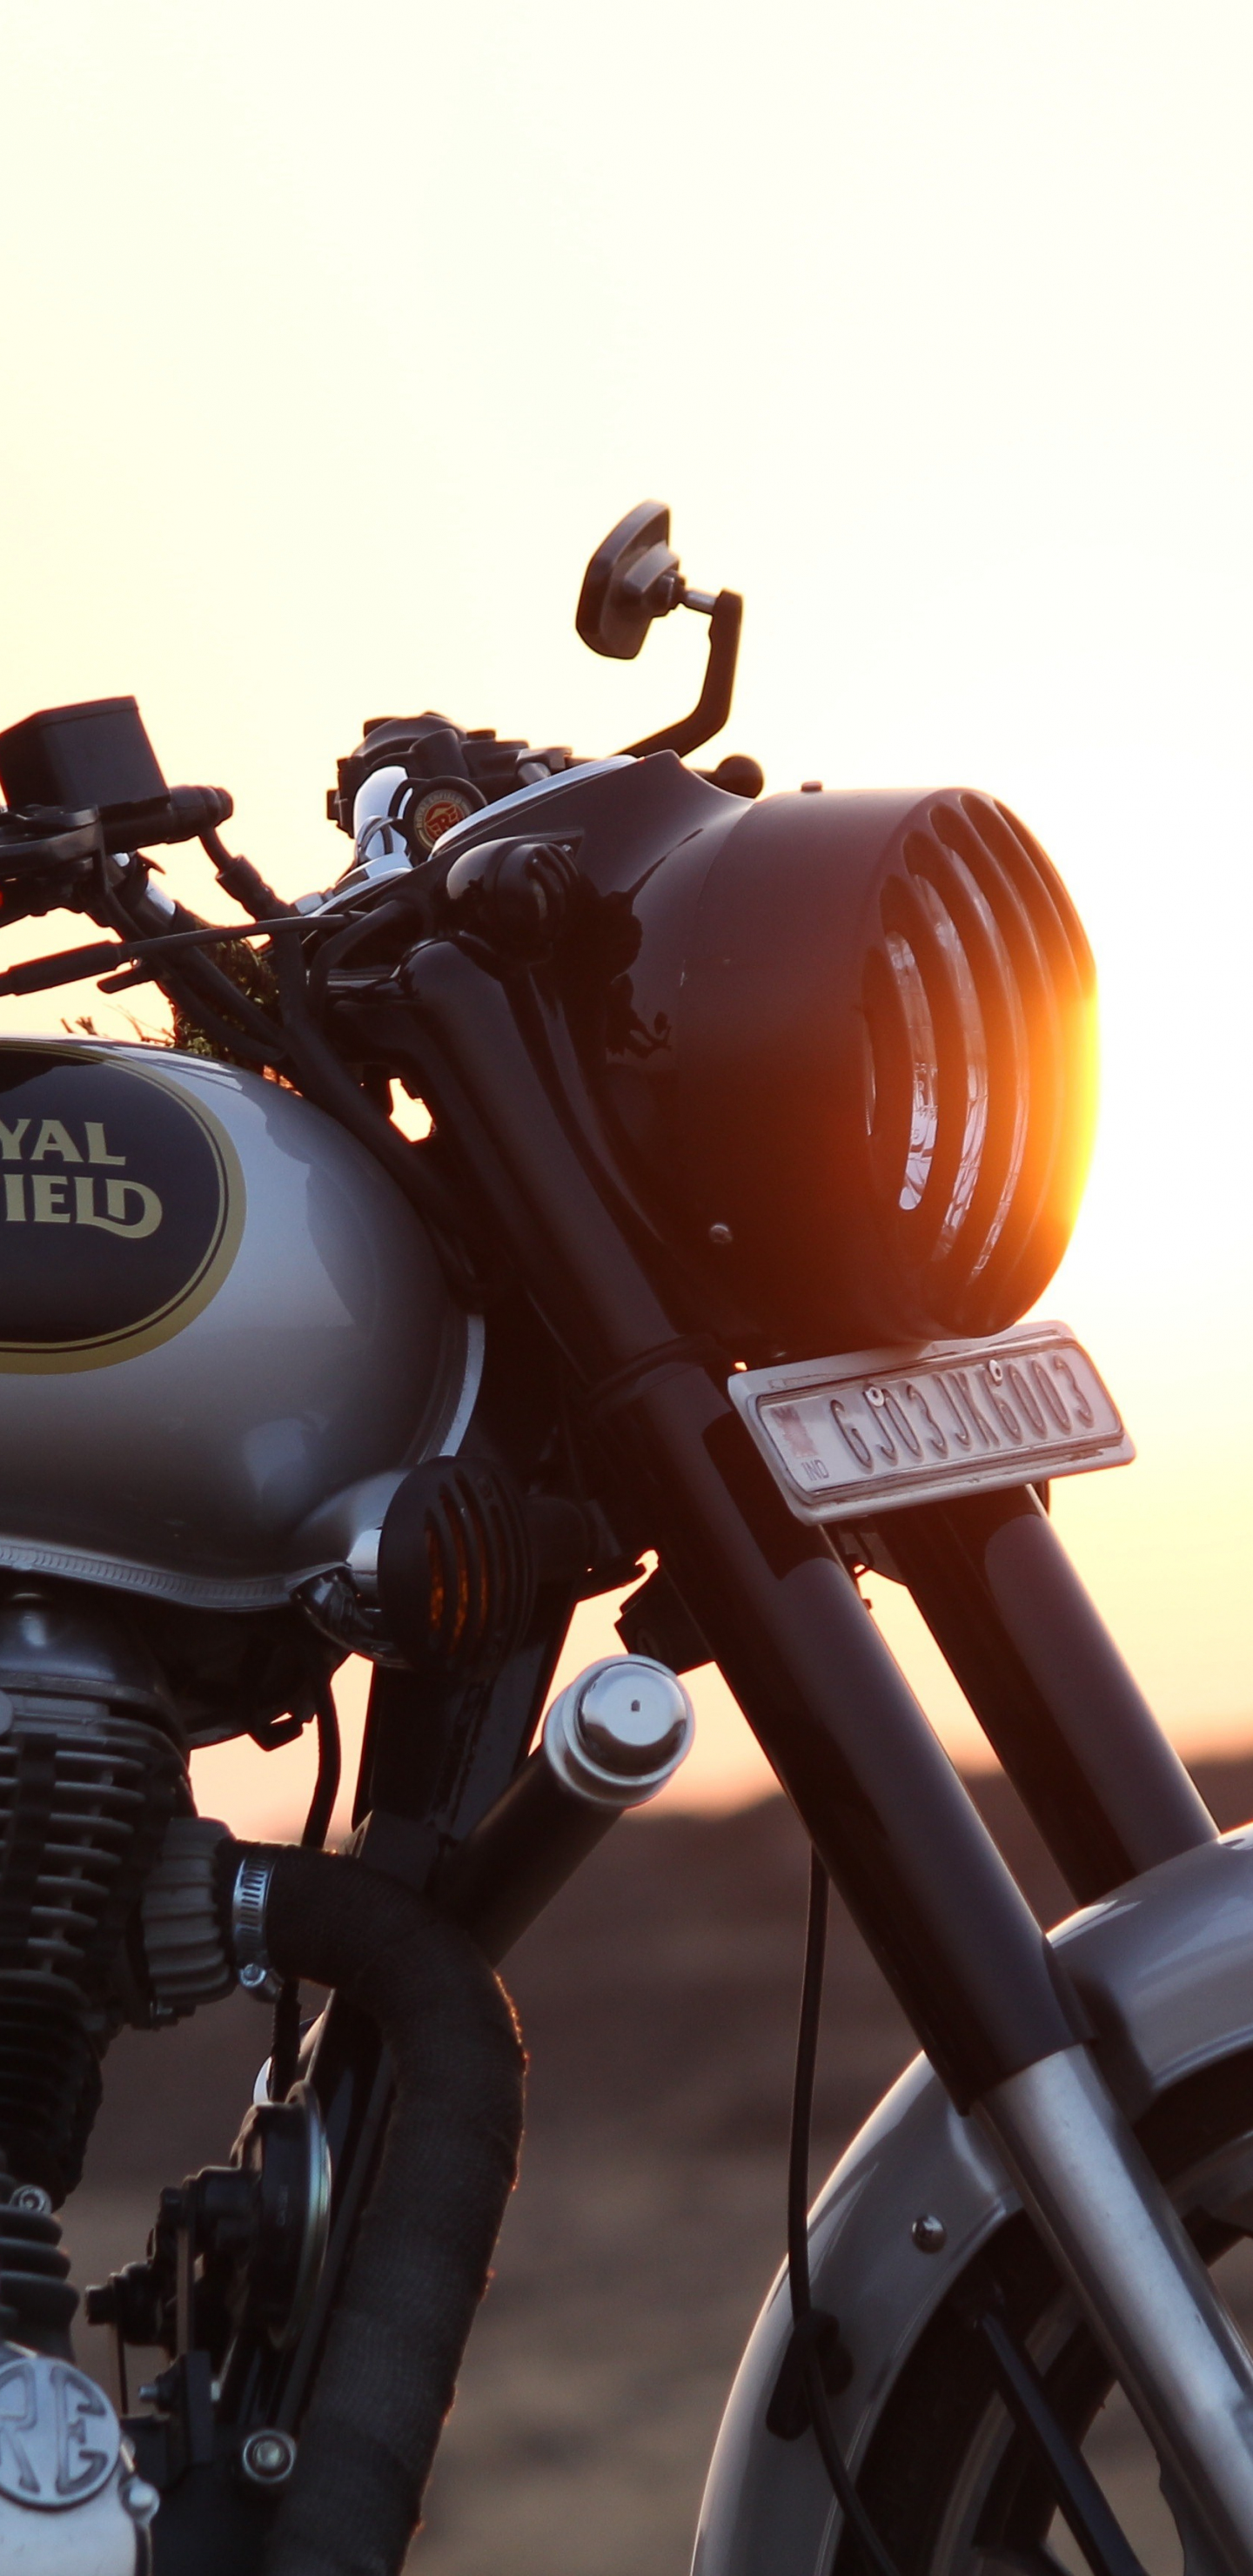 Royal Enfield Classic 350 BS6 Price  Mileage Specs Images of Classic 350   carandbike